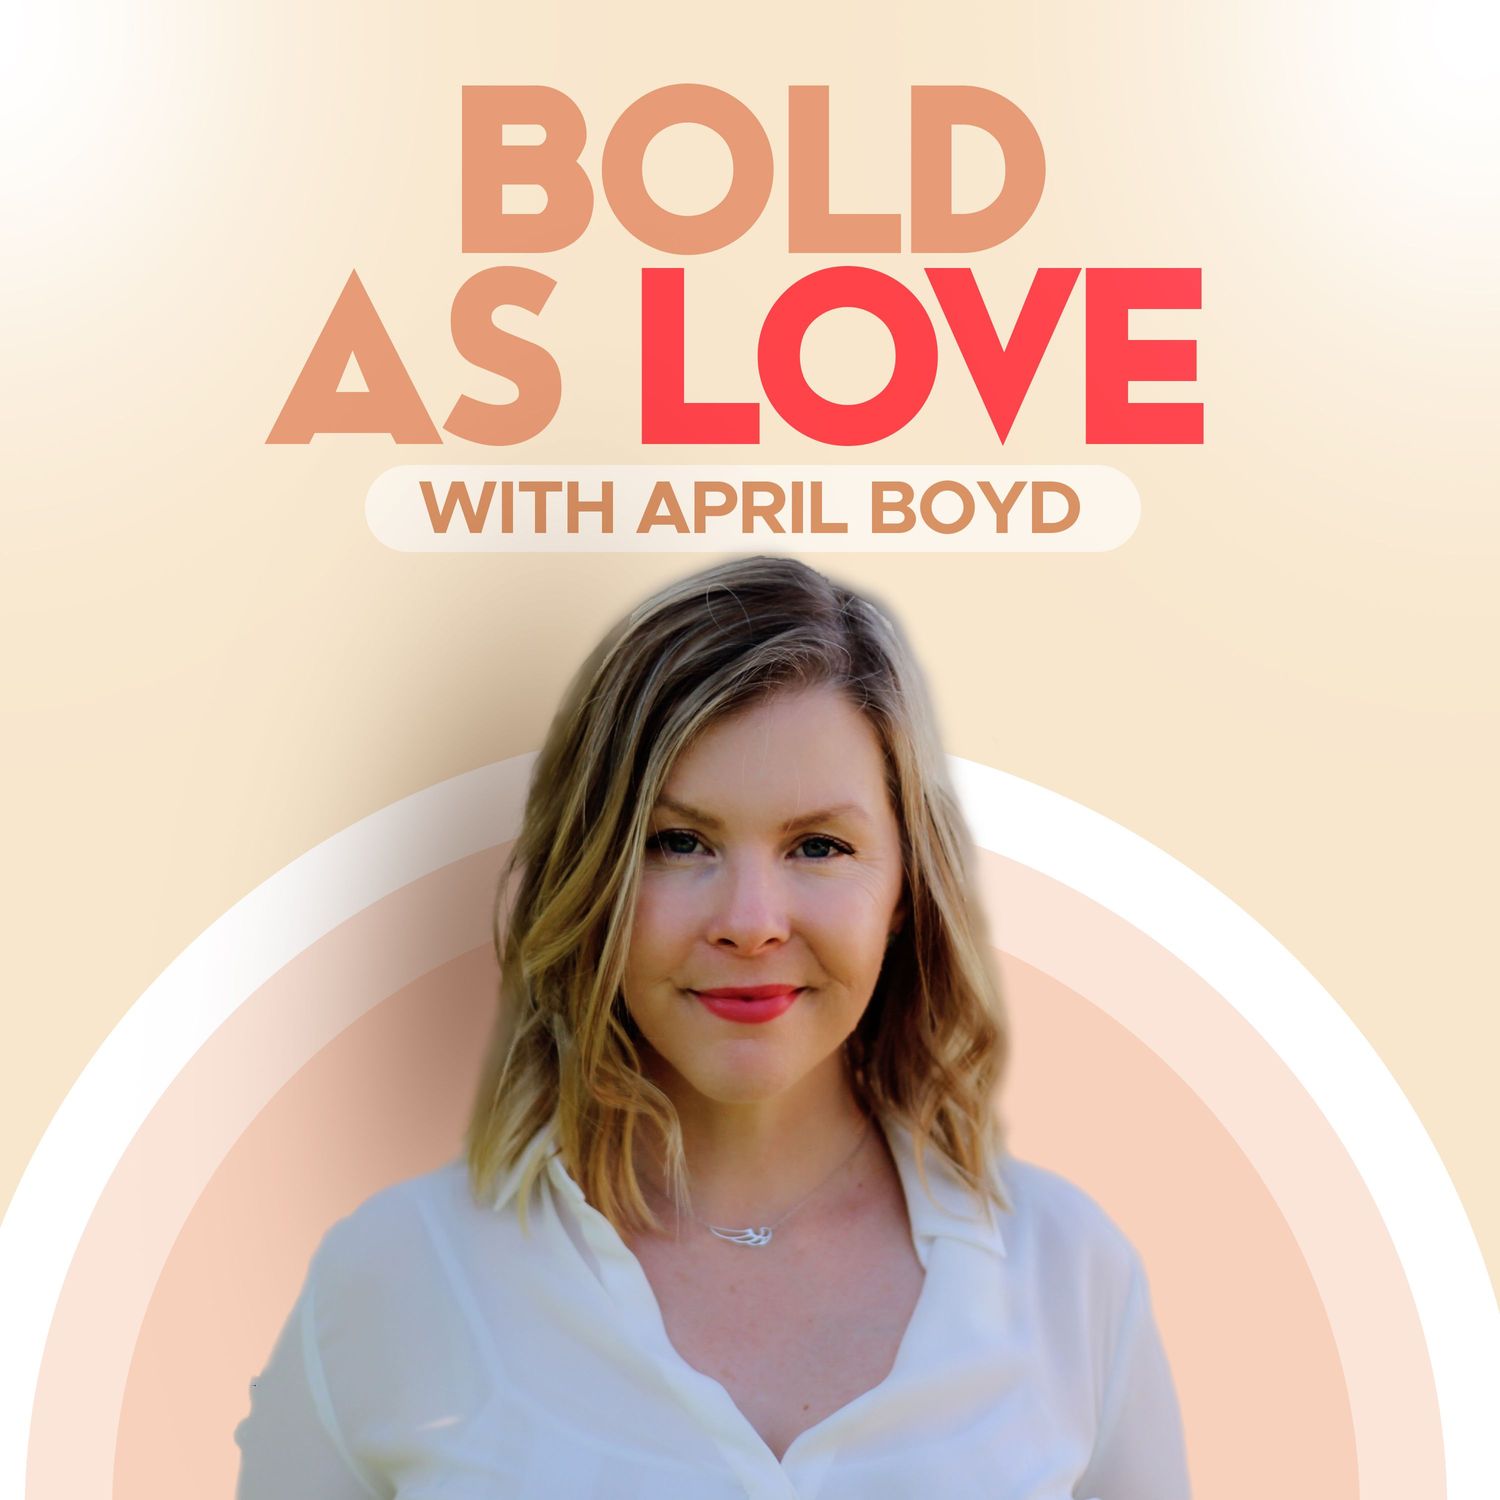 Gallery Photo of Listen to the Bold as Love Podcast with April Boyd on itunes, spotify, and everywhere else.